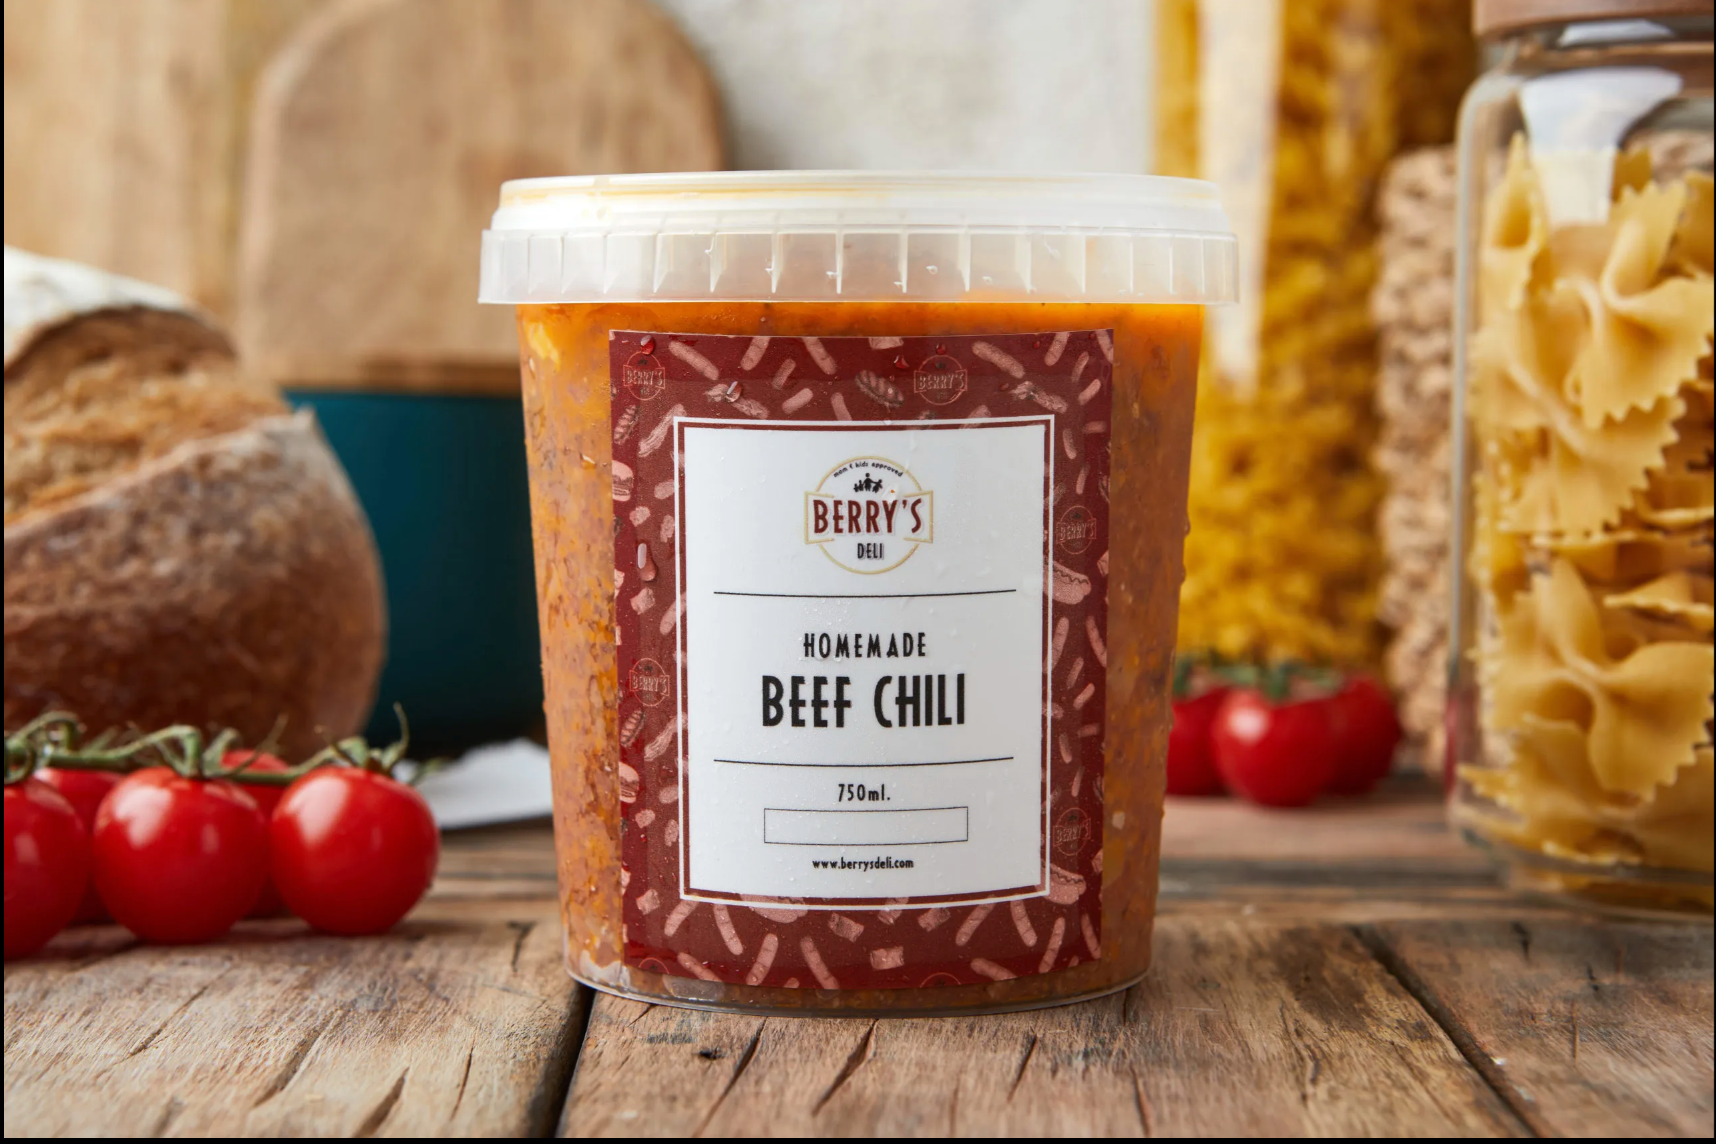 Berry's Deli Homemade Beef Chili by Angelo Comsti